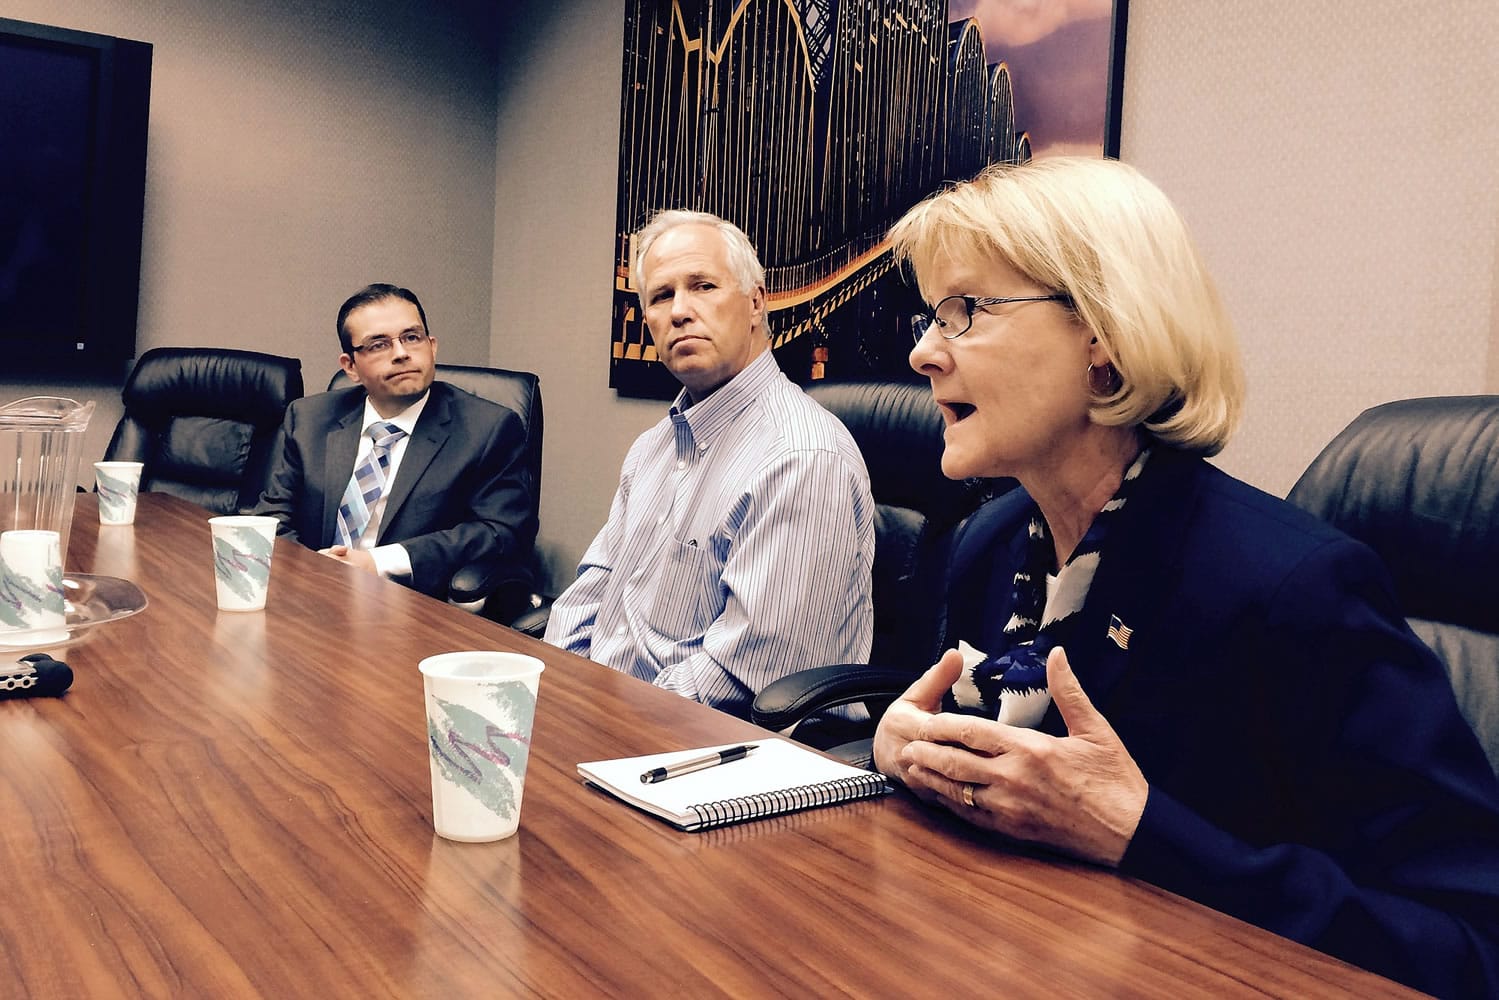 Clark County council chair candidates, from left, Mike Dalesandro, Marc Boldt and Jeanne Stewart meet with The Columbian's editorial board Friday.